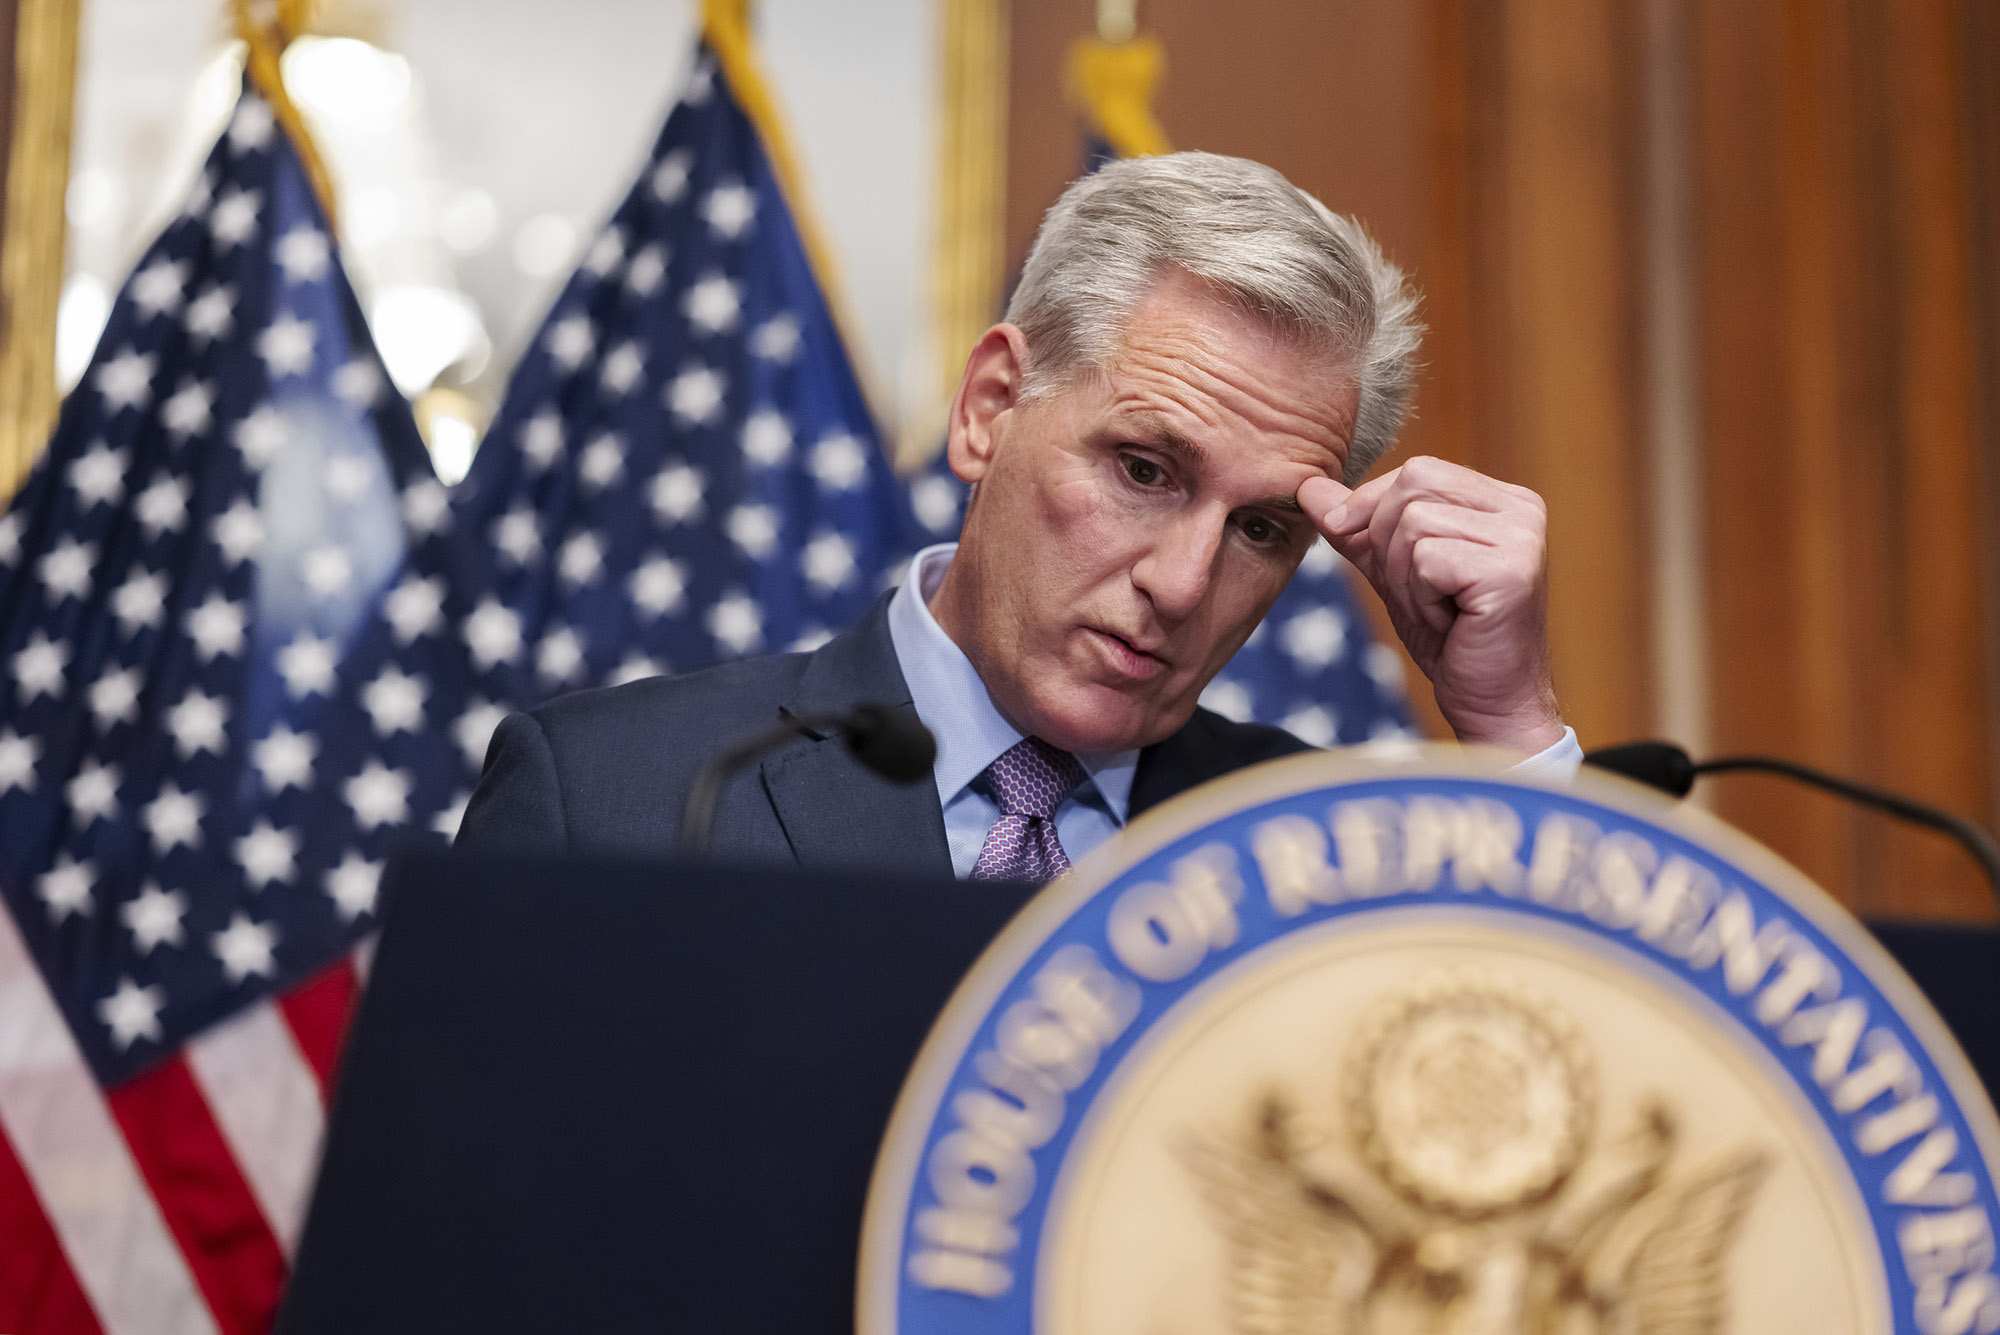 Photo: Kevin McCarthy, former House Speaker, rubs his forehead with his thumb as he looks down, dejectedly. He is a white man with a black suit, blue button up, and a red and blue tie. He stands at a podium with the United States emblem on it and the American flag in the background.